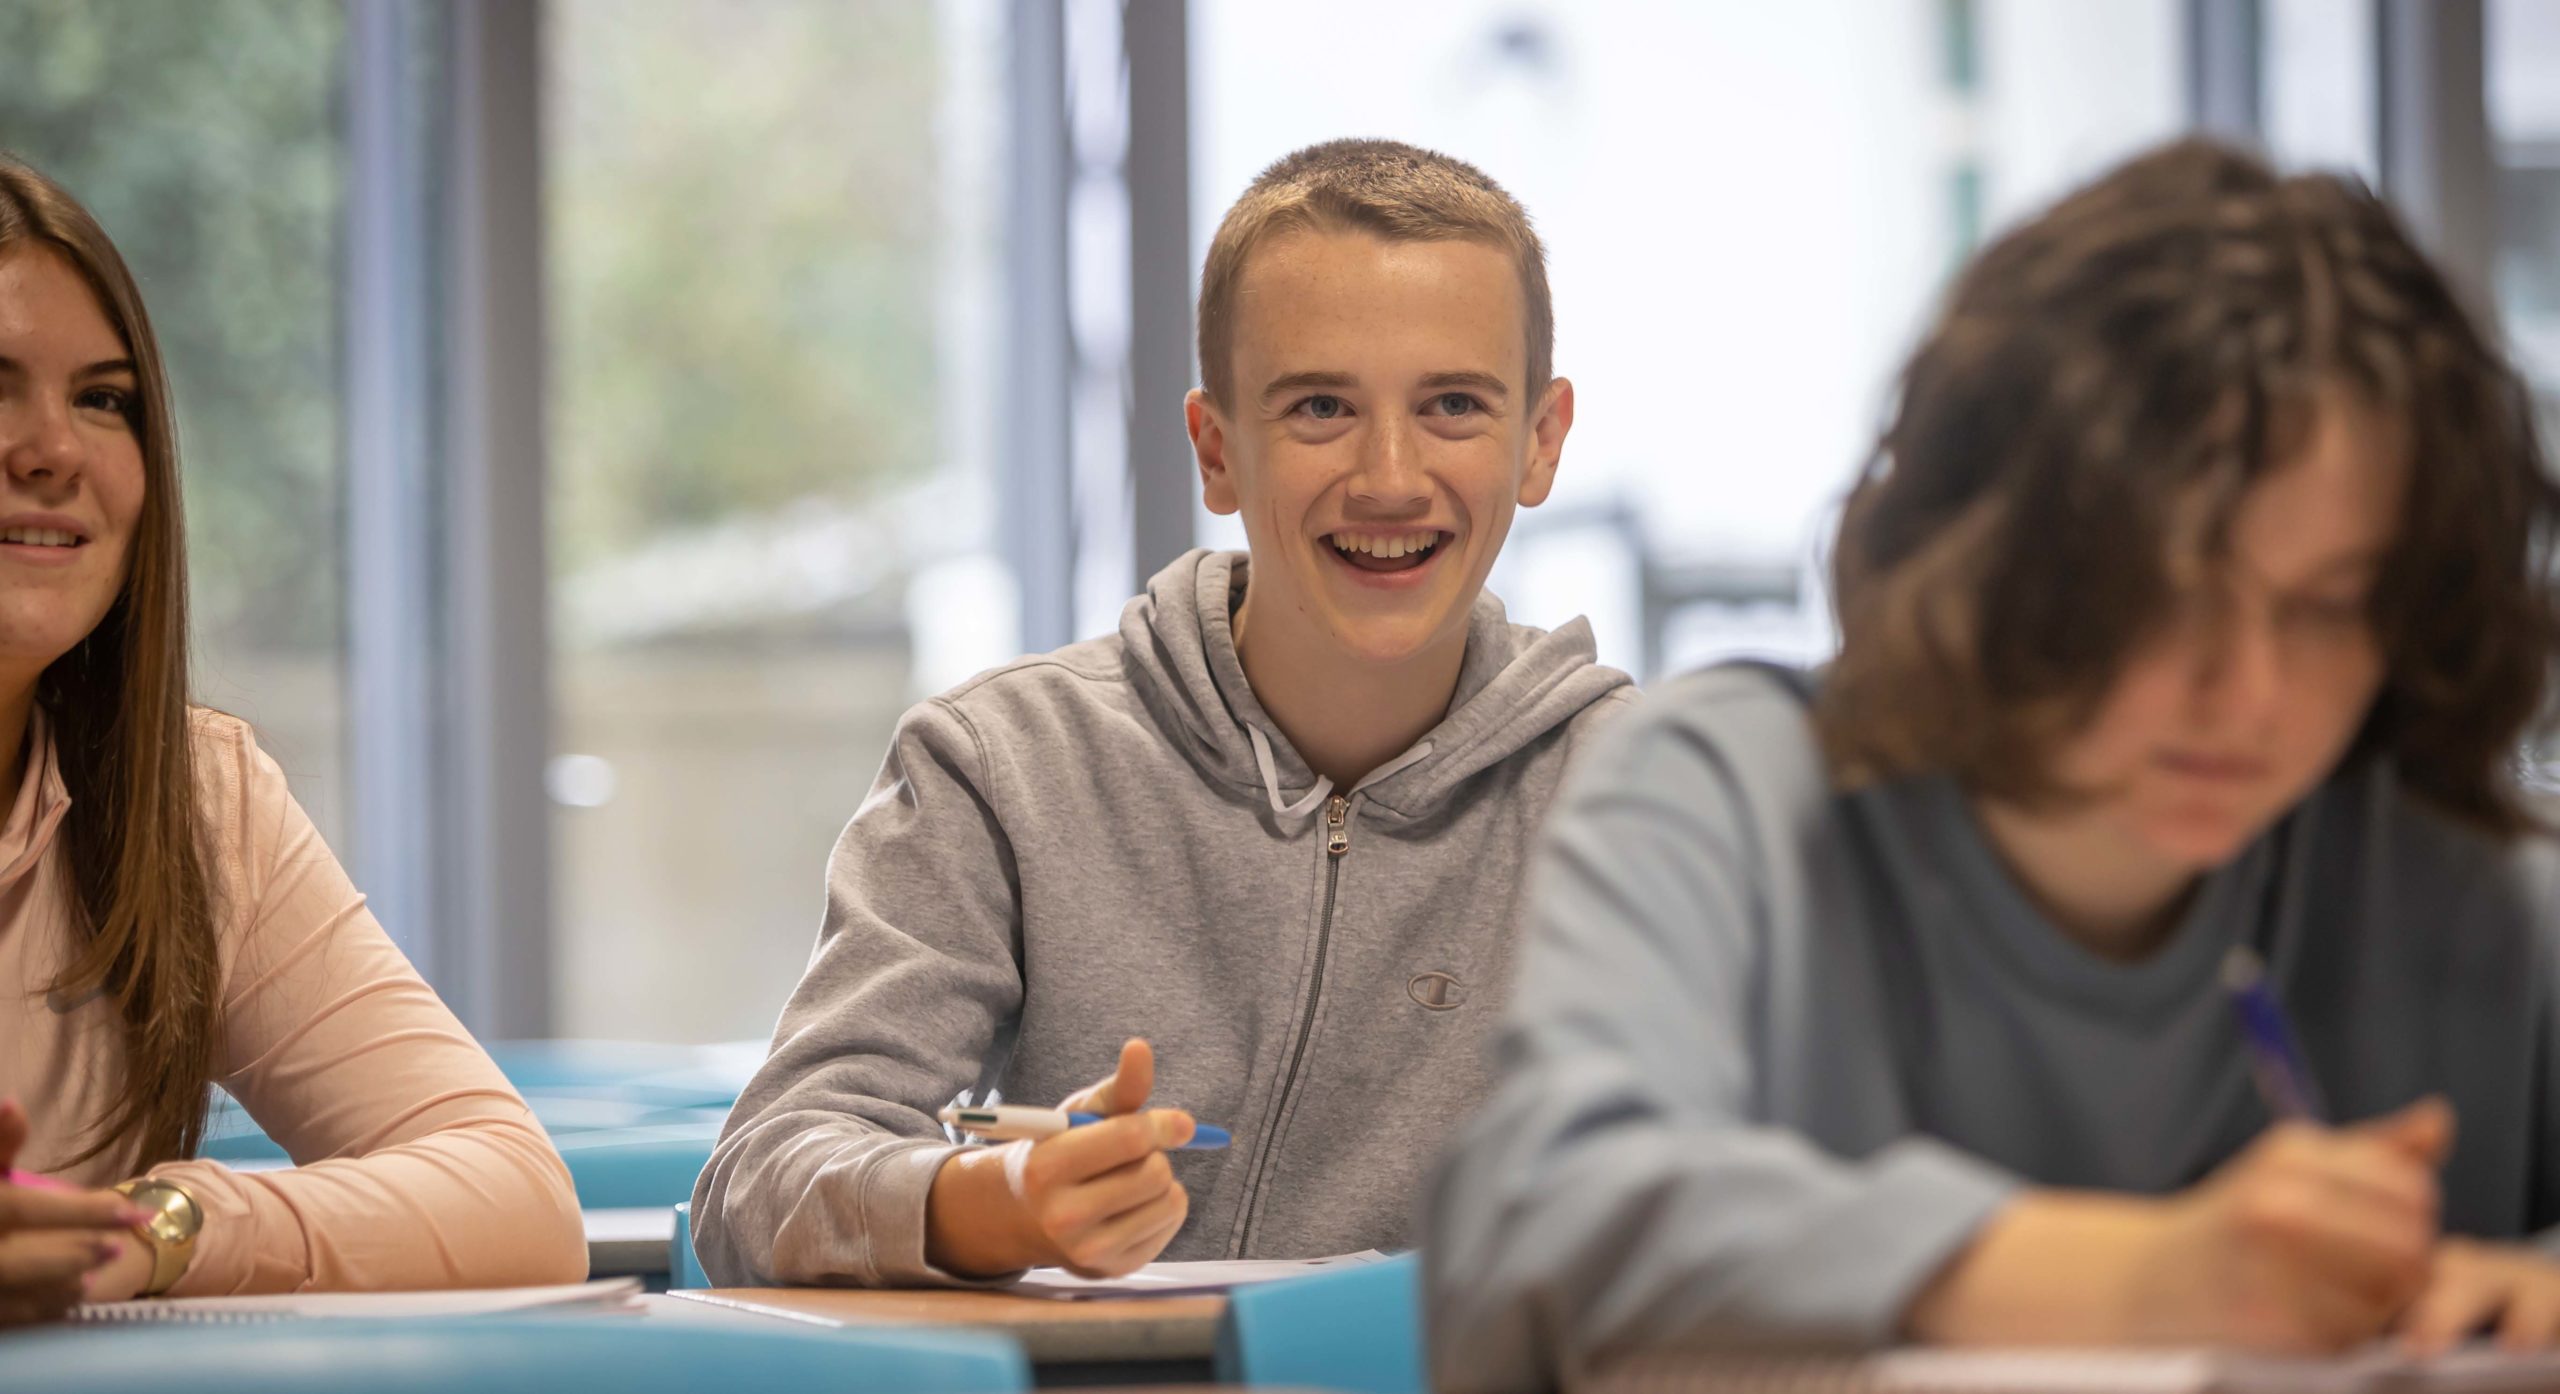 Student smiling in Class